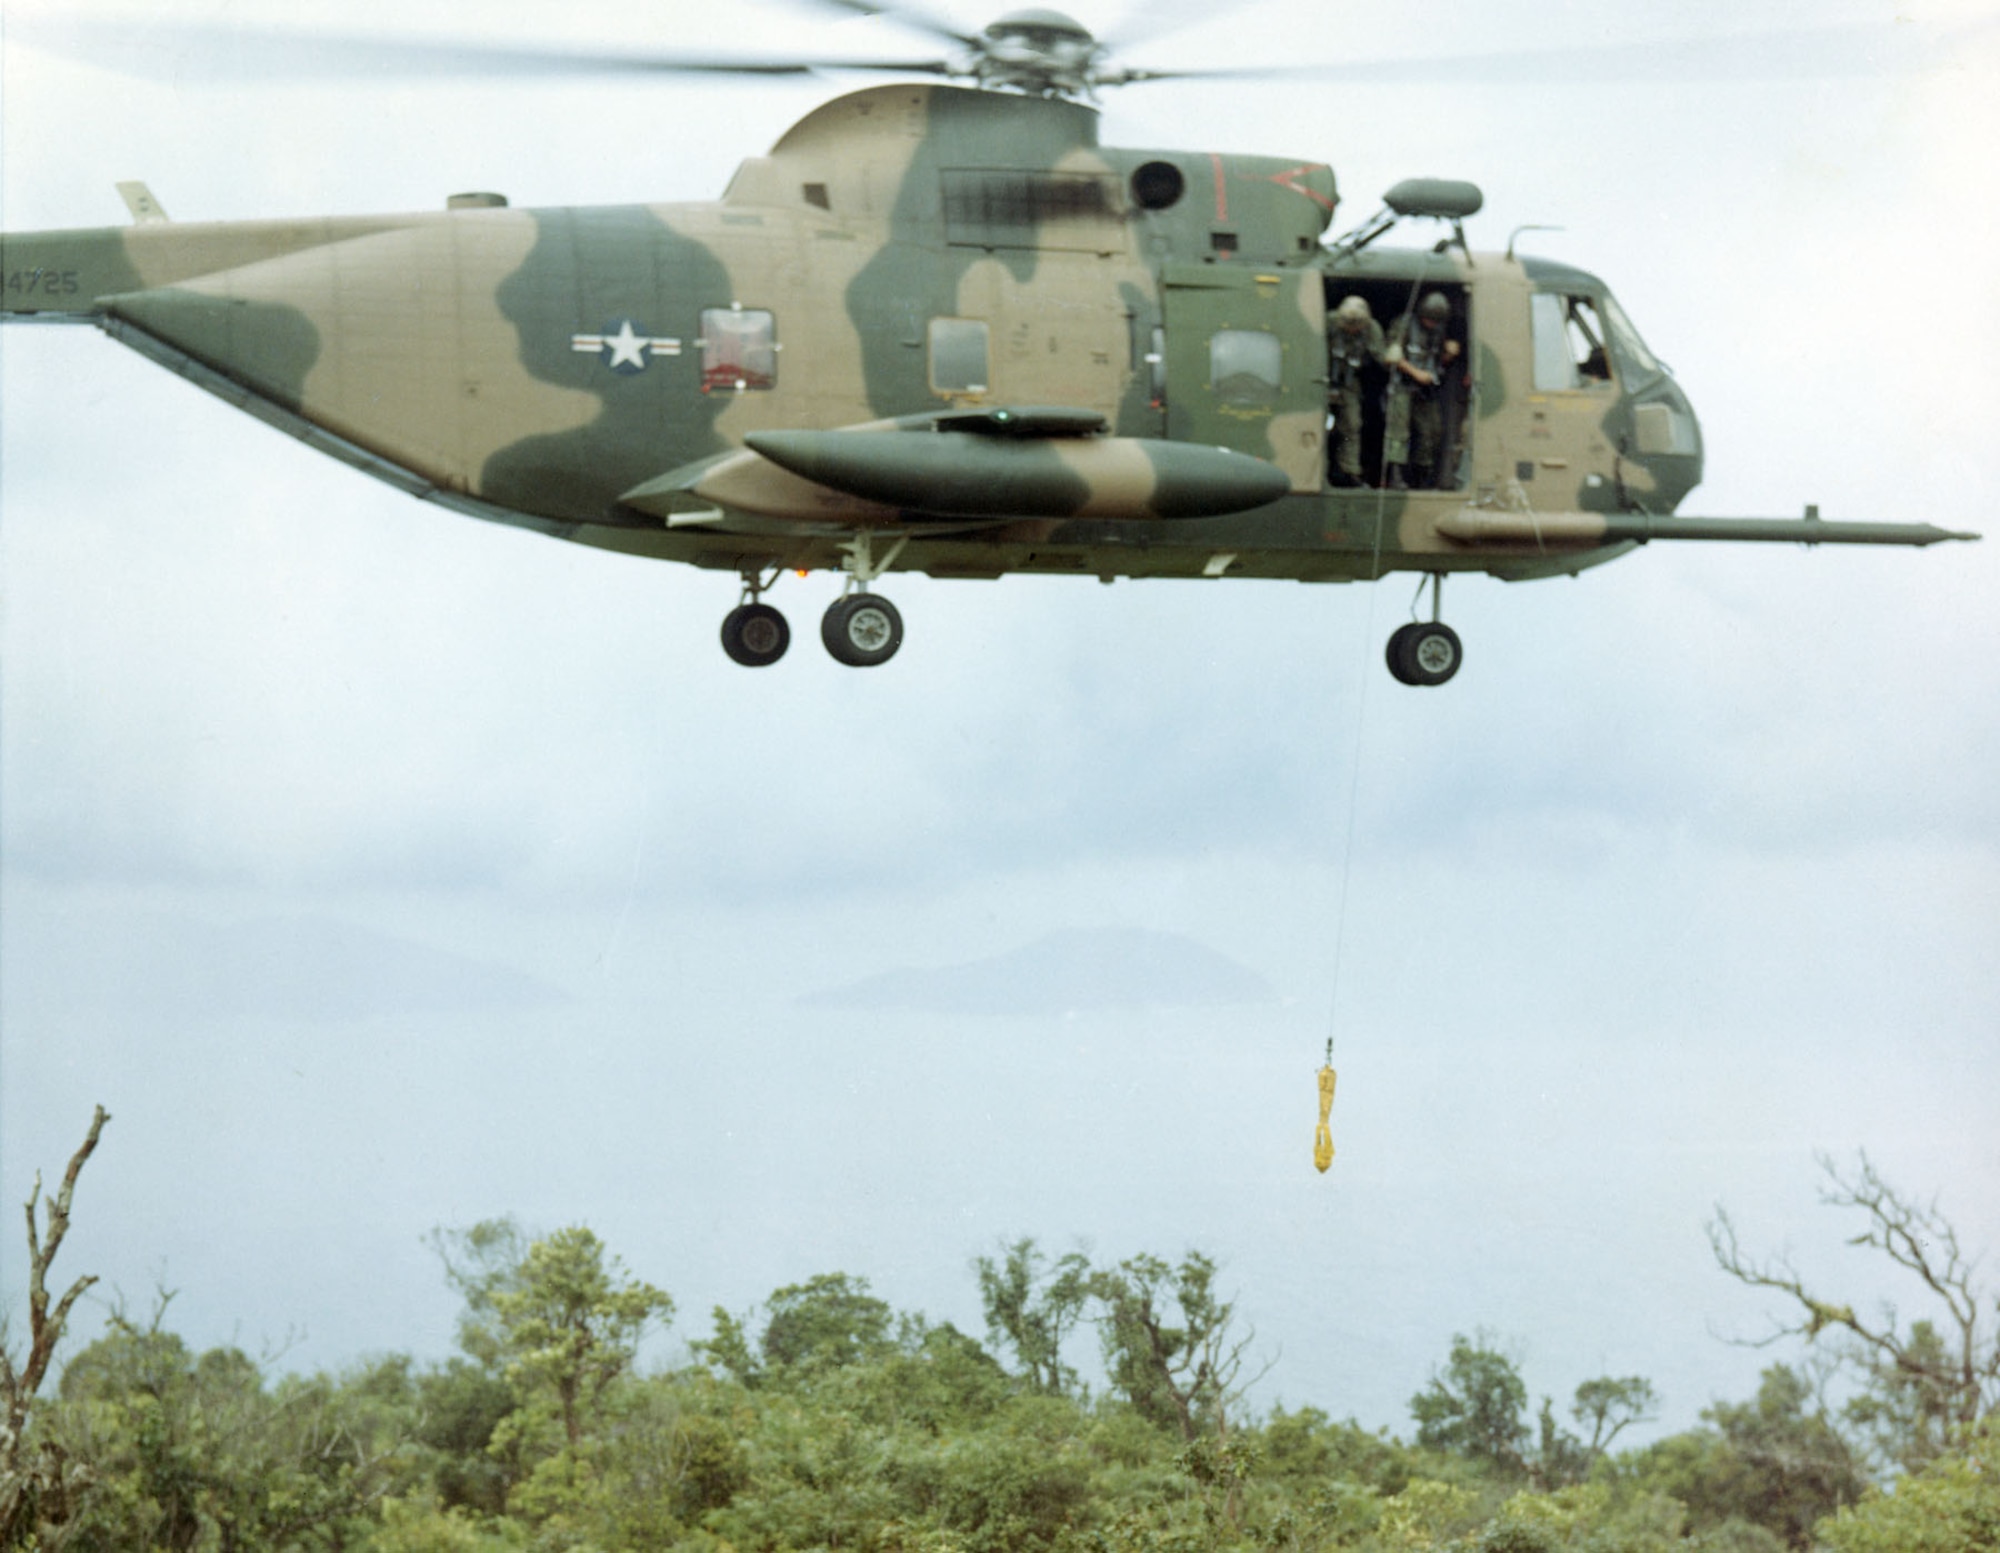 Equipped with a powerful external winch, the Jolly Green Giants could extract a downed pilot without landing. Here, an aircrew practices lowering a jungle penetrator. (U.S. Air Force photo)